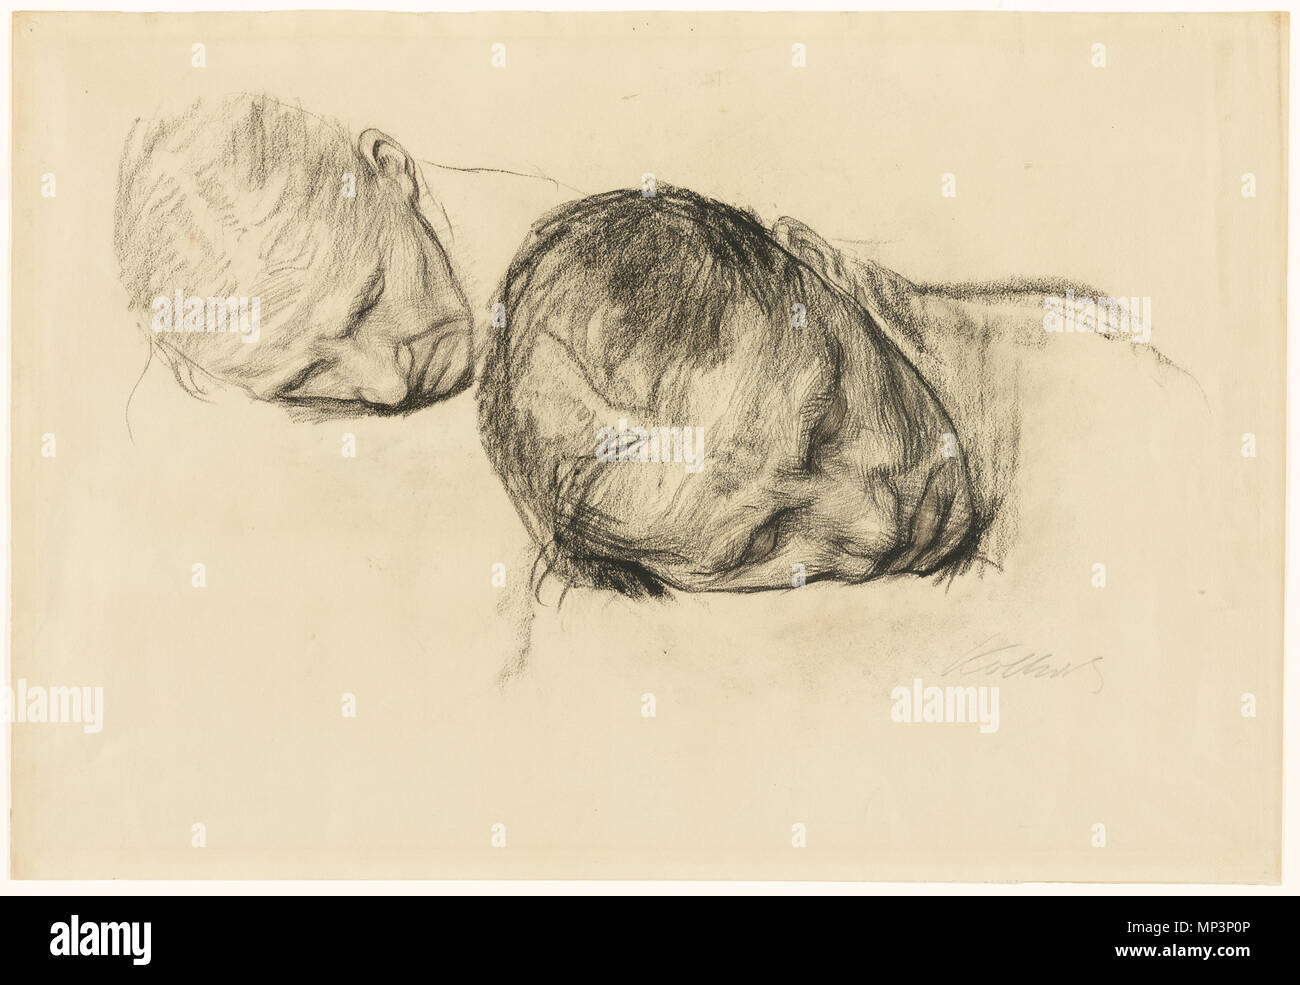 creator: Käthe Kollwitz (German printmaker and sculptor, 1867-1945); Two Studies of a Woman's Head; creation: c. 1903; drawings (visual works); buff wove paper; sheet: 19 x 24.6875 in; image: 16.875 x 24.6875 in; outer frame: 23.625 x 29.5 x 0.875 in; repository: Minneapolis Institute of Arts, Minneapolis (Hennepin, Minnesota, United States, North and Central America), 19748; 71.65; Public Domain 71.65 772 Kollwitz TwoStudiesOfAWomansHead MIA 7165 Stock Photo